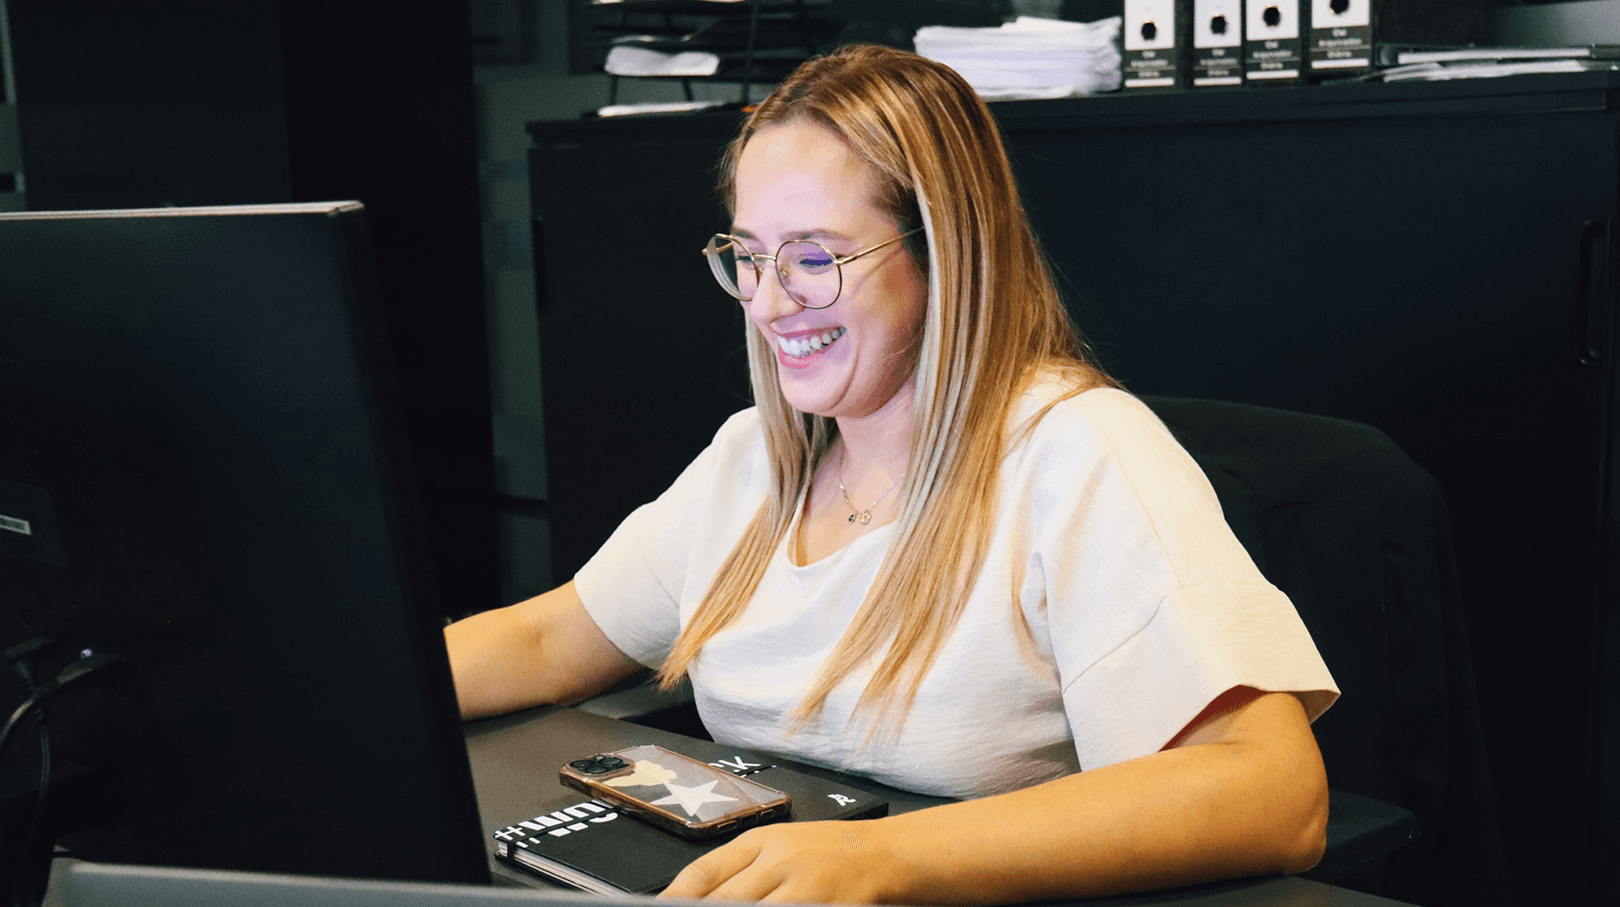 young blonde woman smiling while working at the computer. Dressed in shades of white. In the background we can see details of the office, all in shades of black.